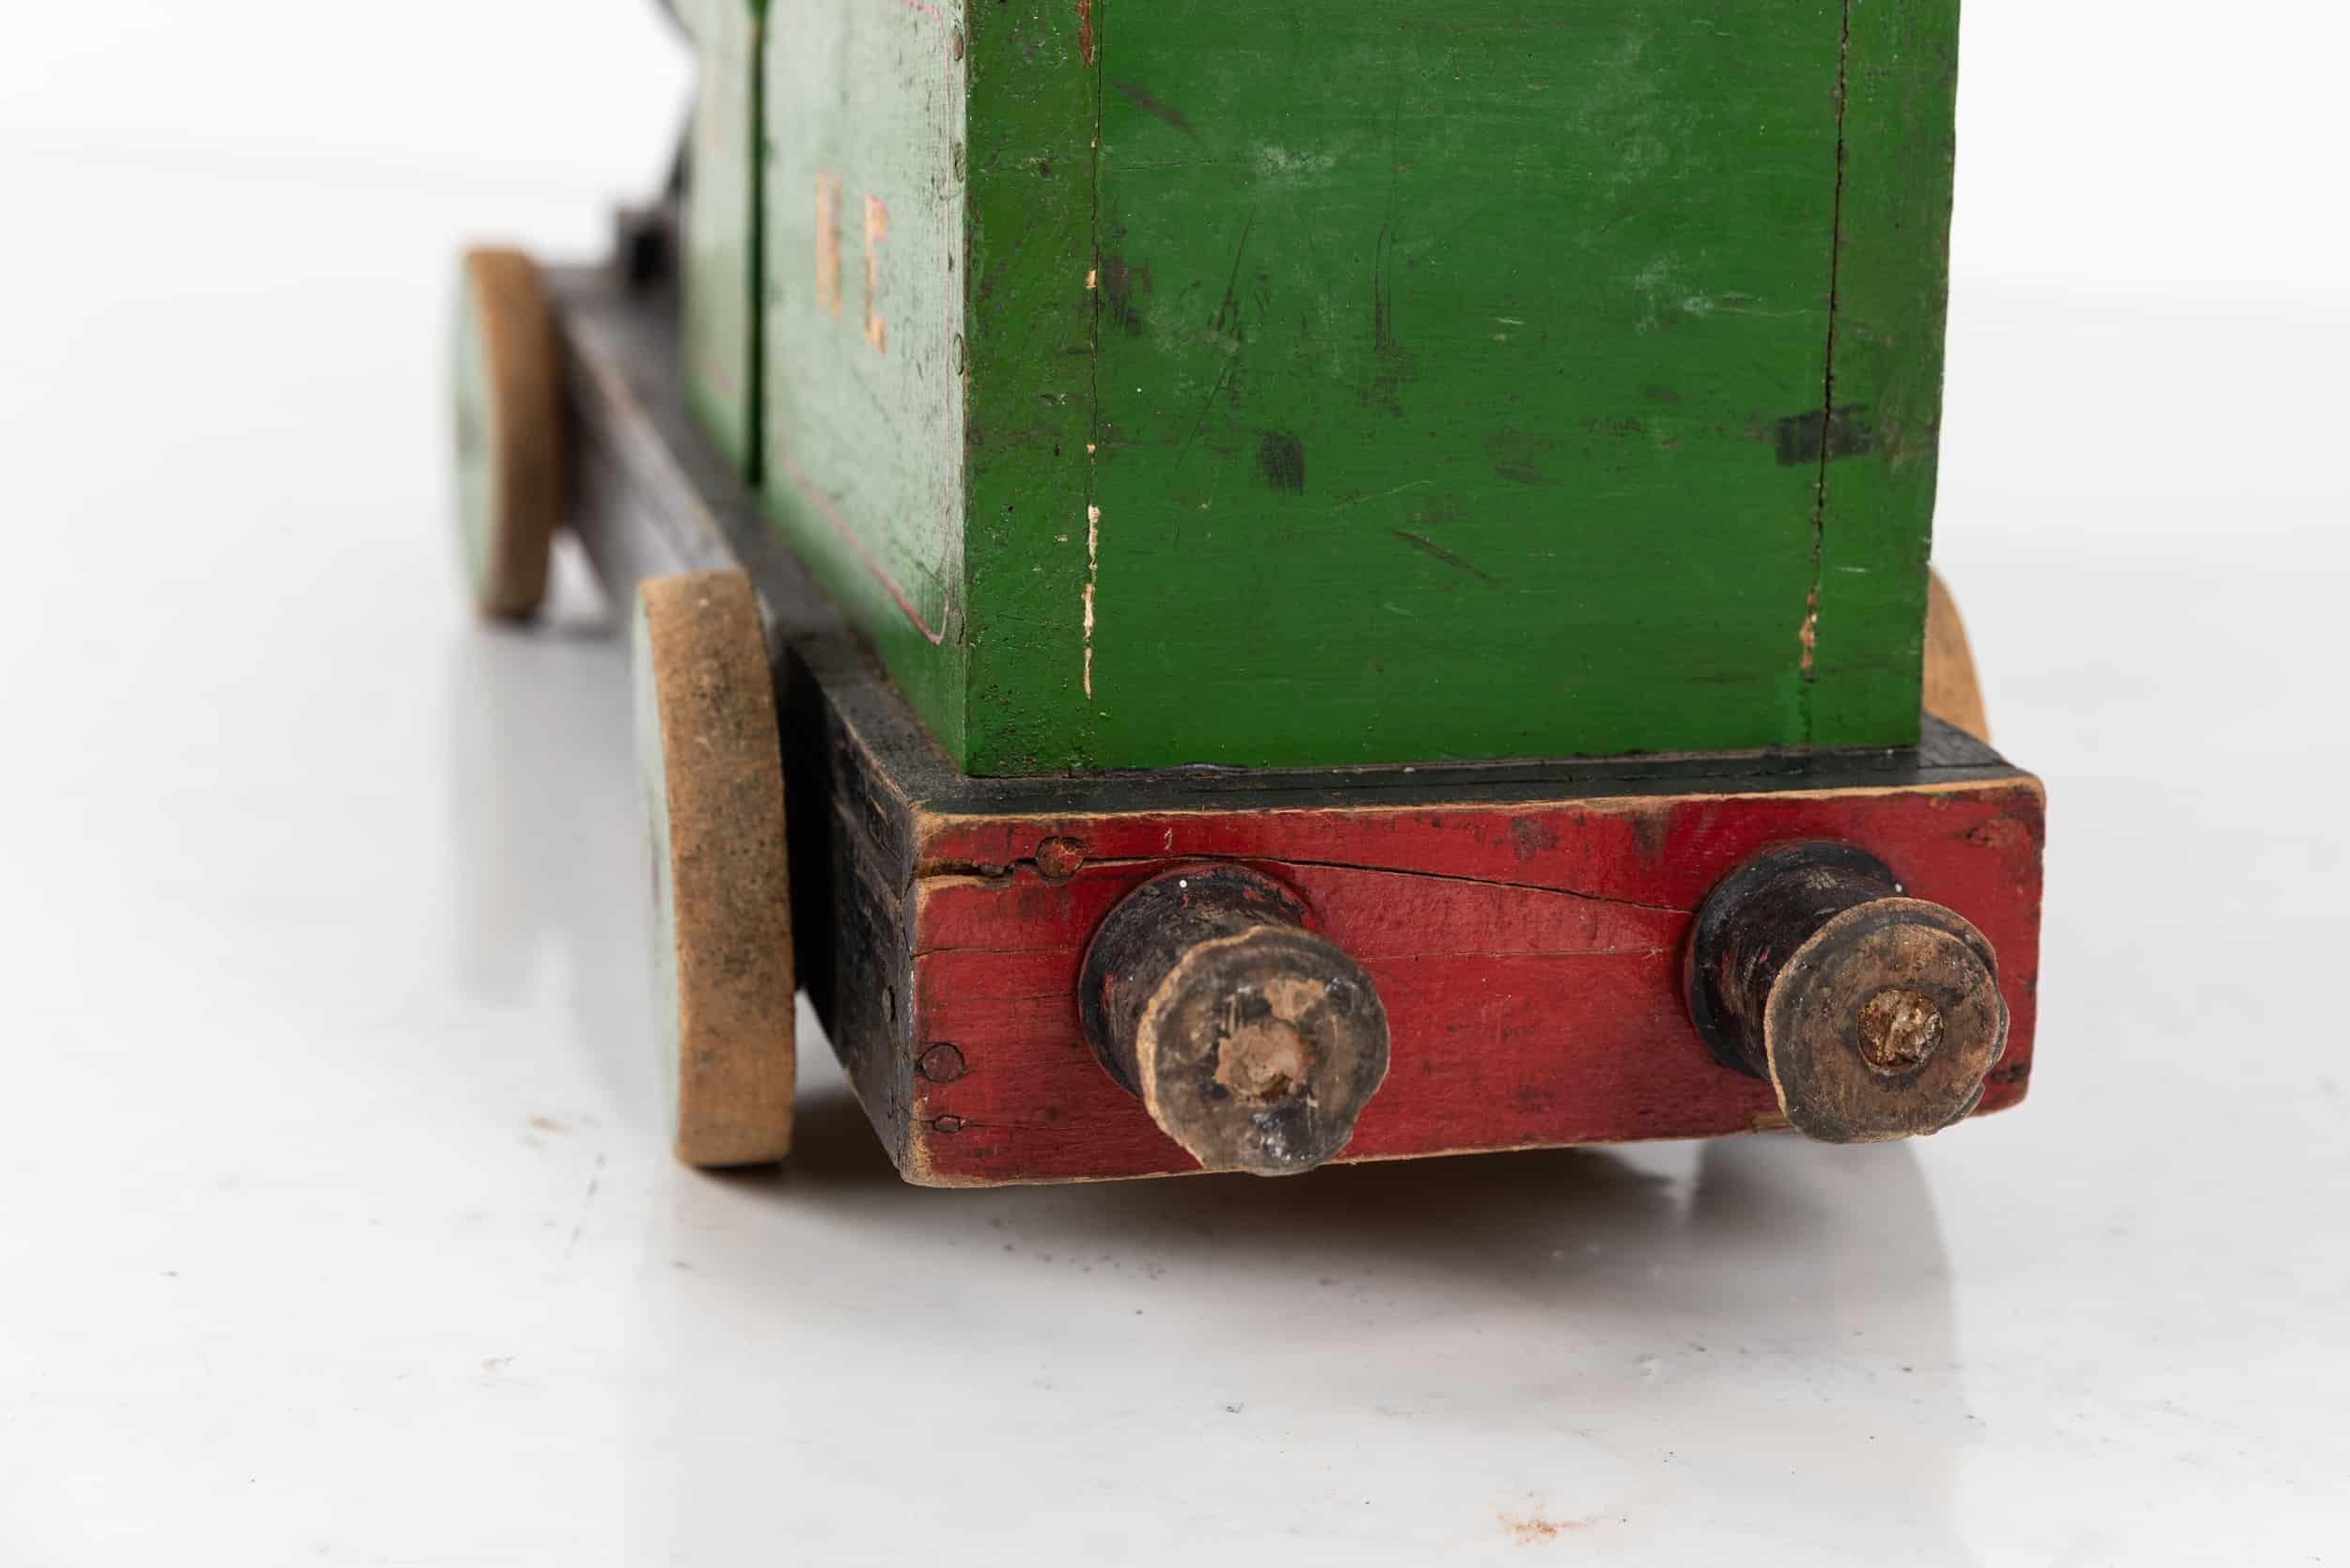 Hand-Crafted Vintage Industrial Scratch Built Railway Toy Steam Train Model. C.1940 For Sale